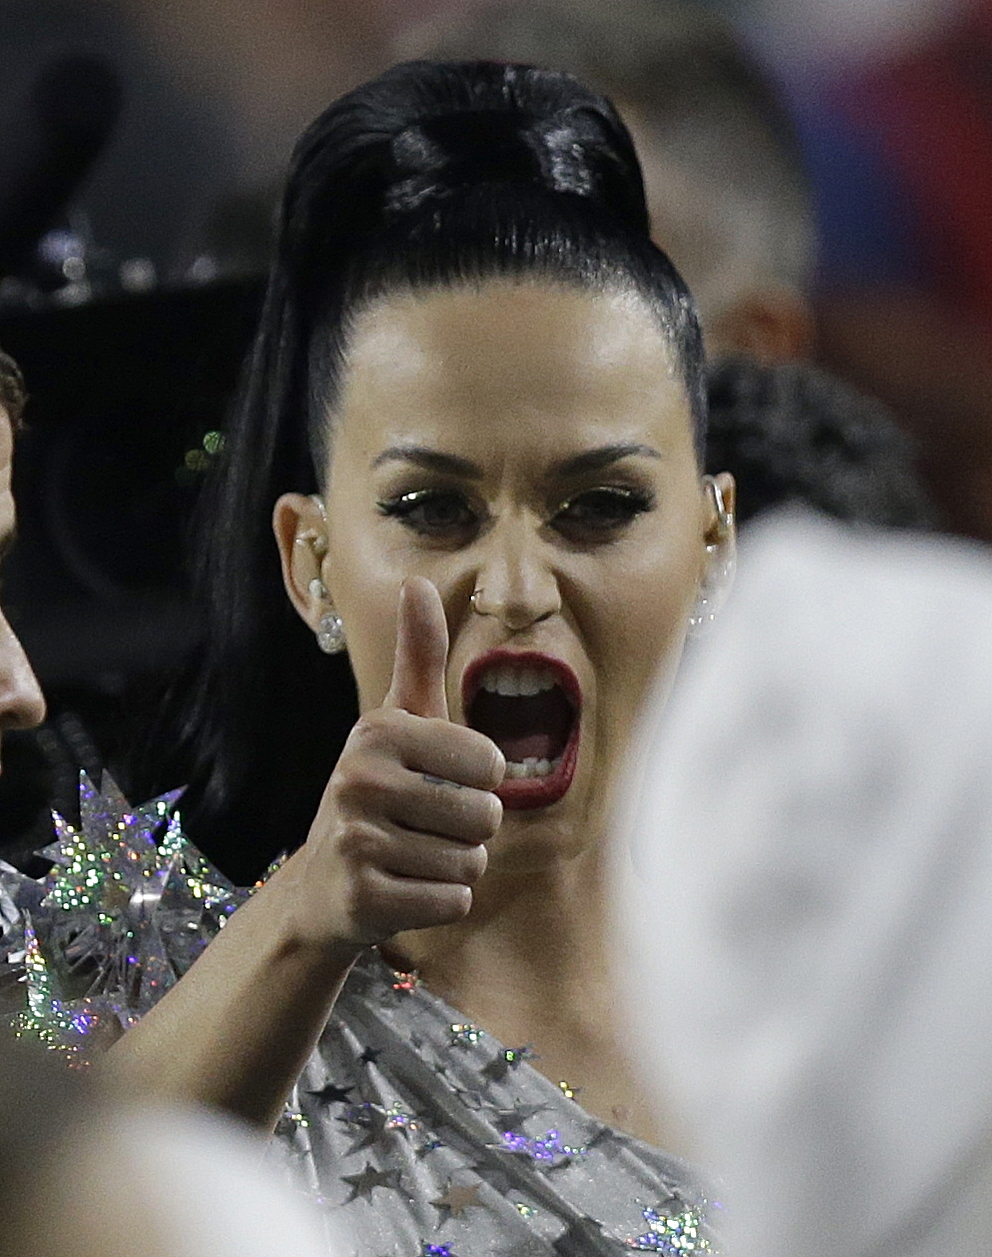 Katy Perry approves.